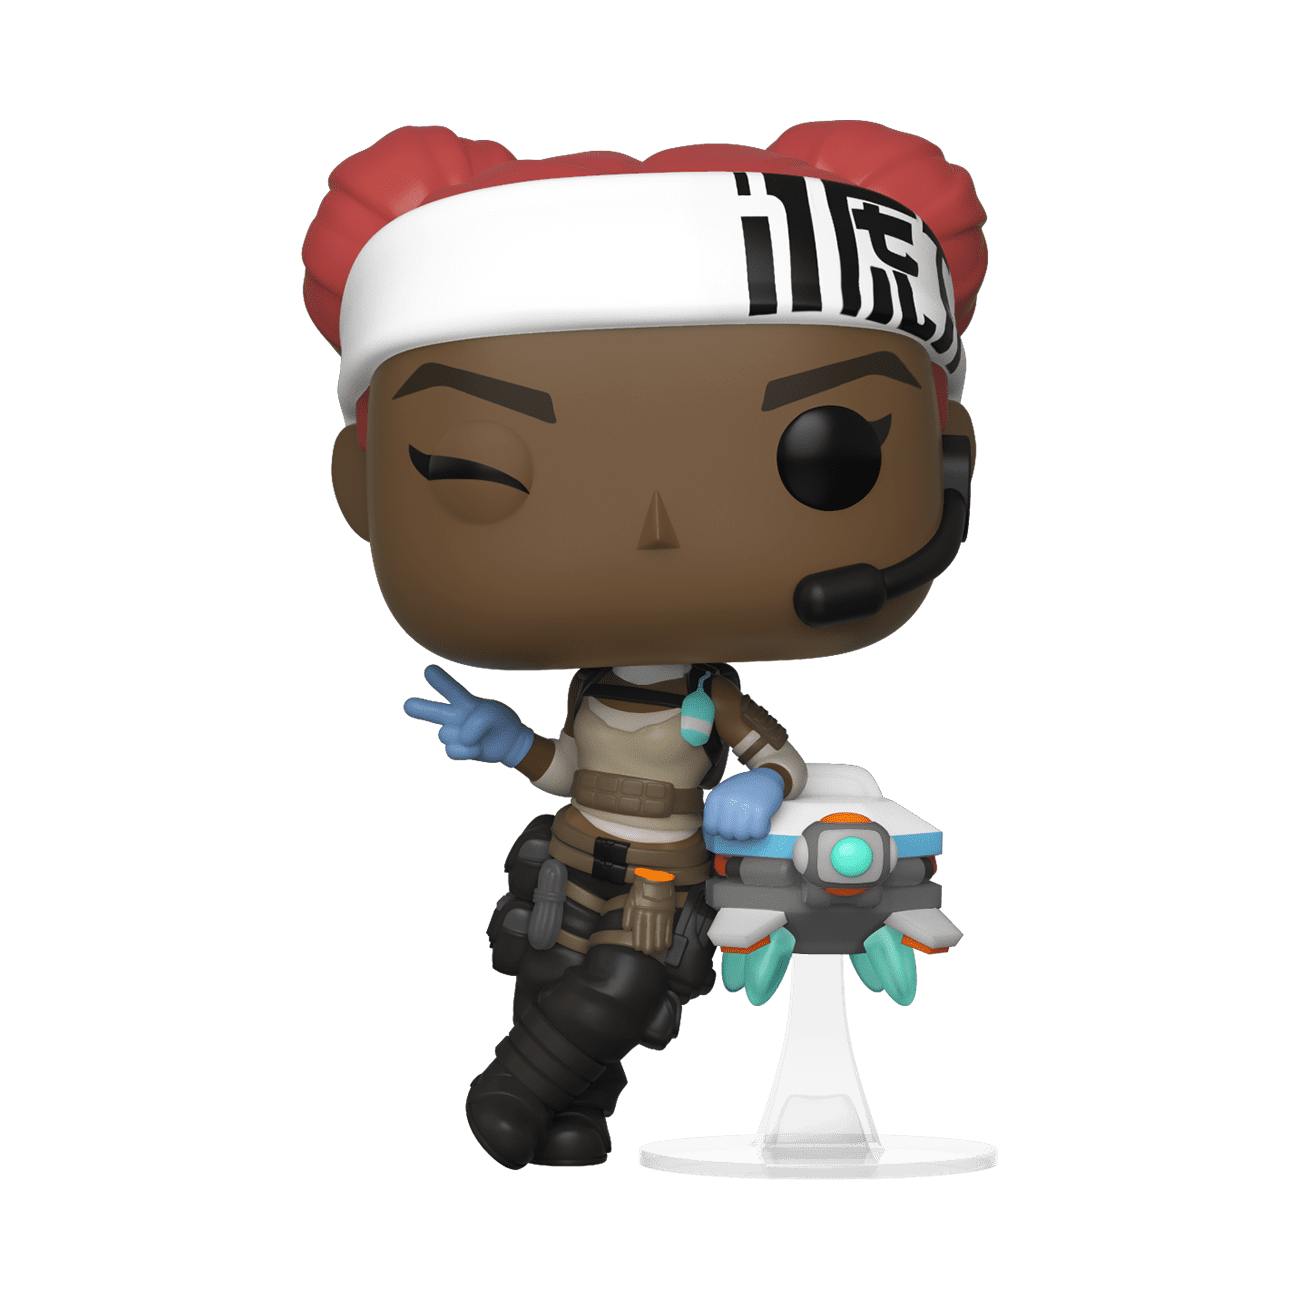 NEW OFFICIAL FUNKO POP GAMES APEX LEGENDS MIRAGE COLLECTABLE FIGURE 